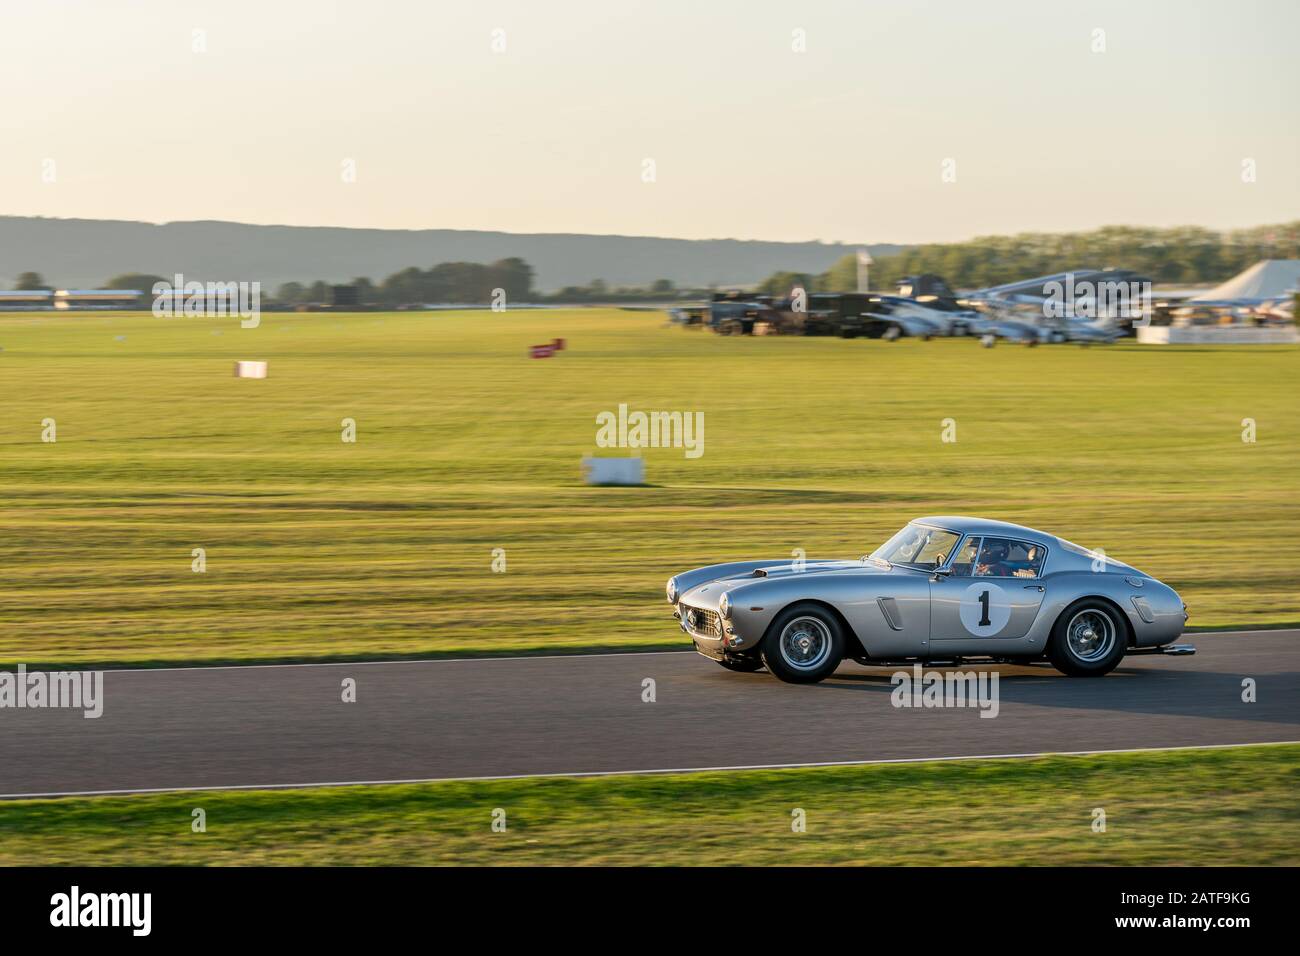 Goodwood Revival and a  Ferrari 250 GT swb Berlinetta hurtling round the Goodwood Motor circuit during the Kinrara Trophy Race. Stock Photo